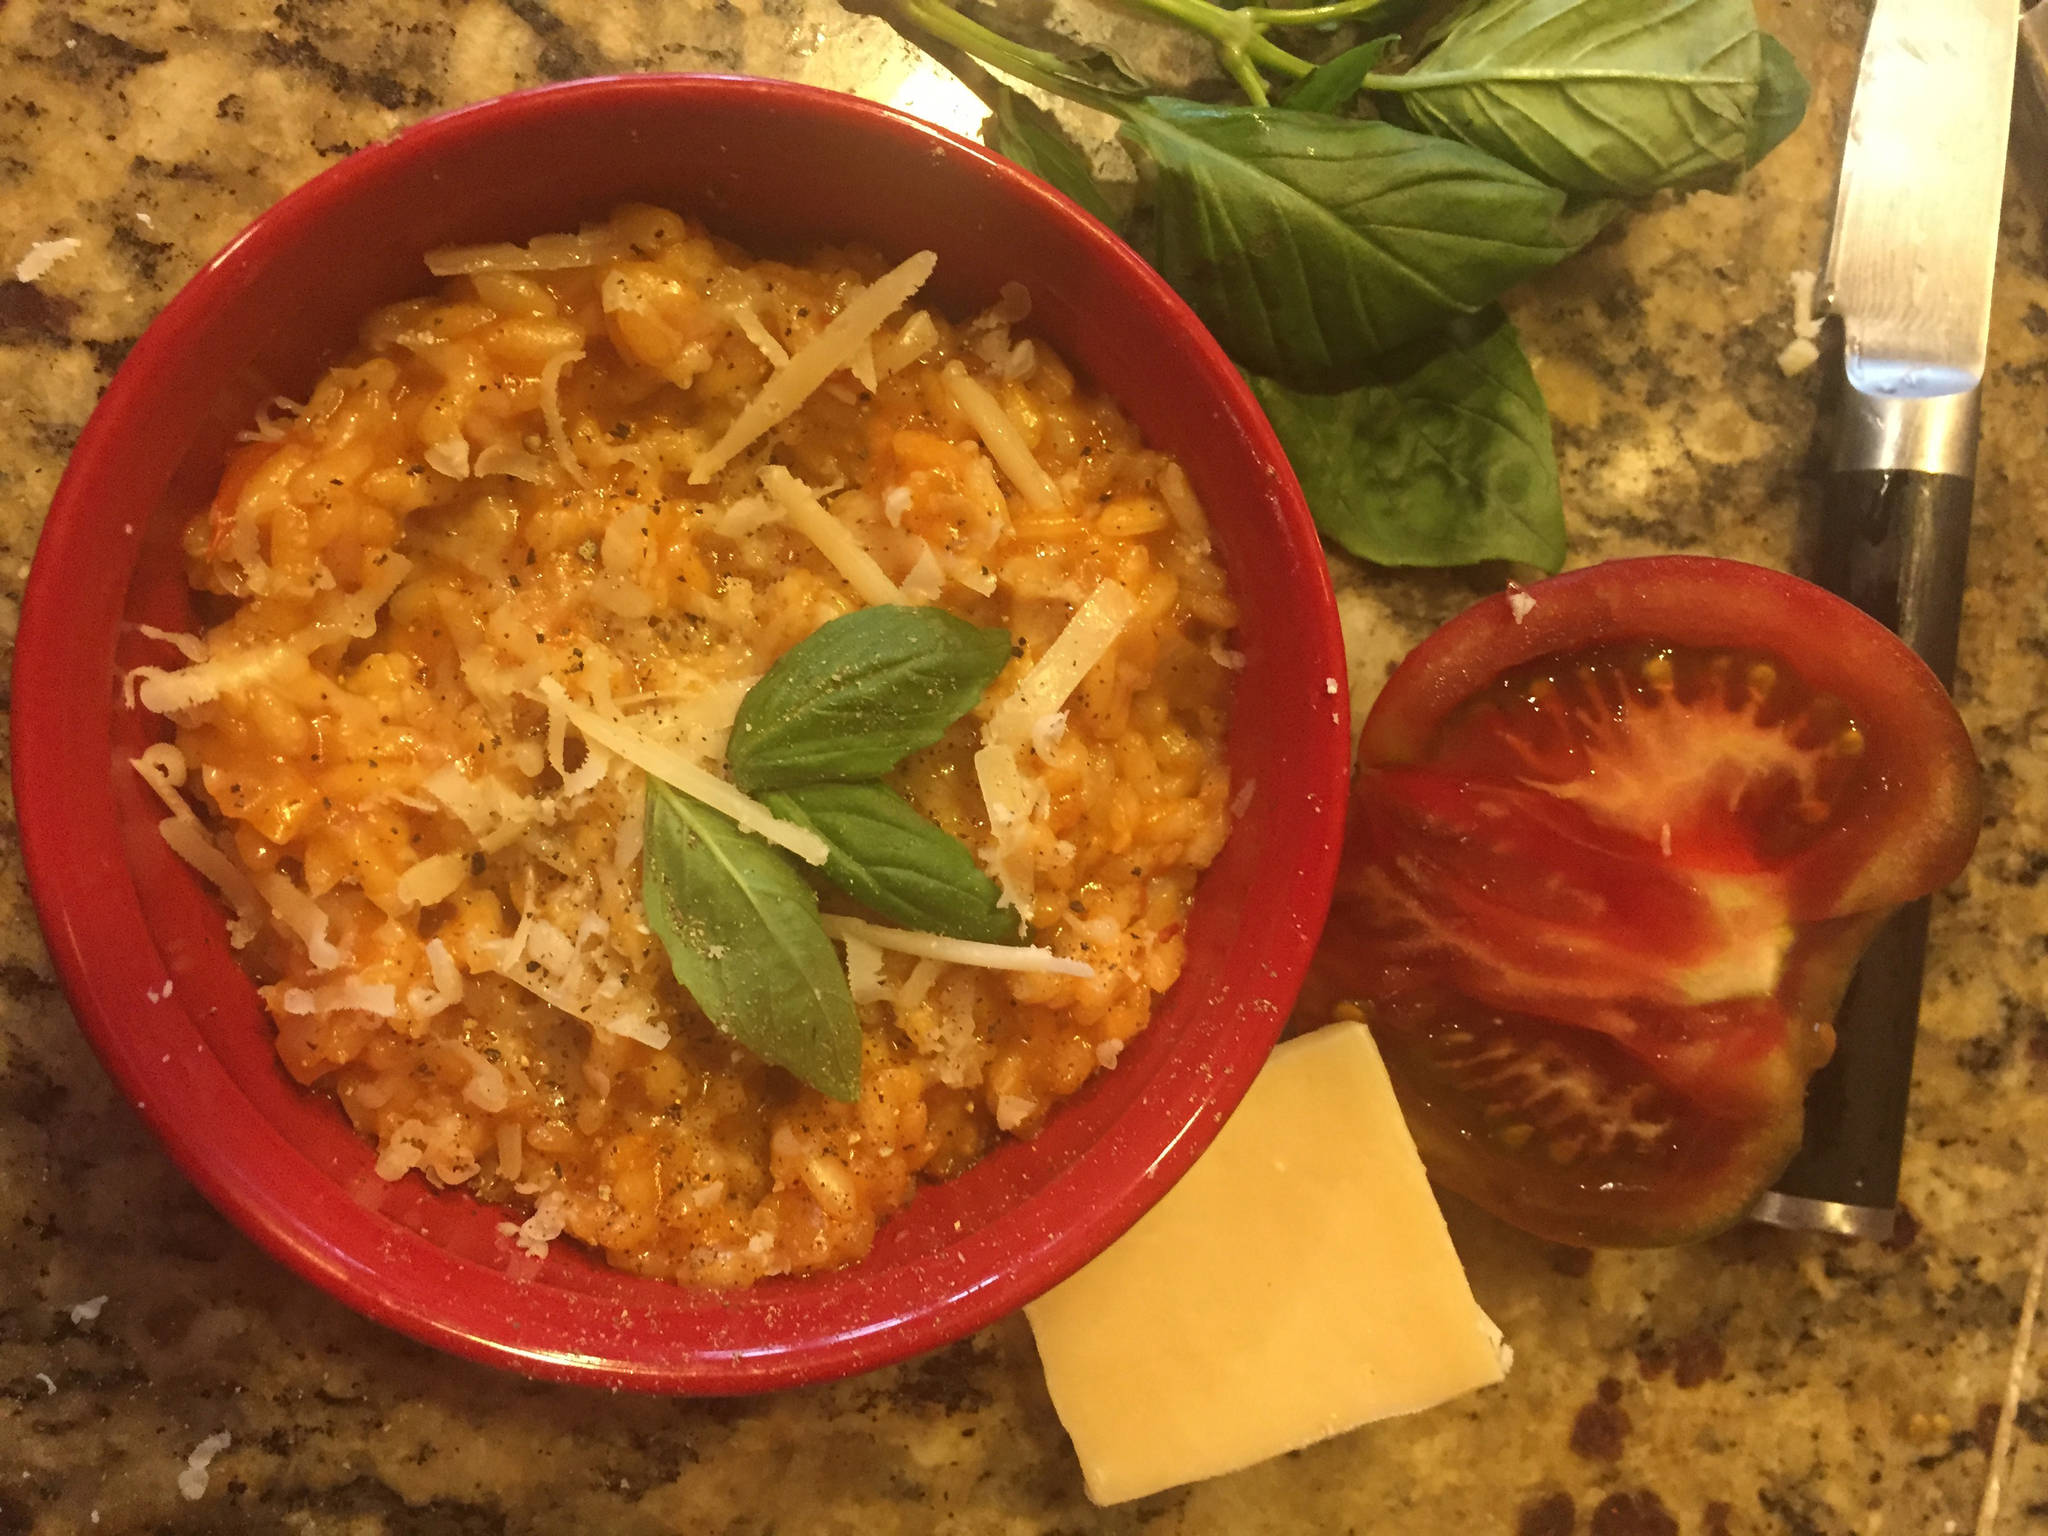 Tomato Risotto takes time to make, but the preparation can be therapeutic. Garnish with snipped basil, as seen here in Teri Robl’s kitchen in this photo taken on Sept. 17, 2019, in Homer, Alaska. (Photo by Teri Robl)